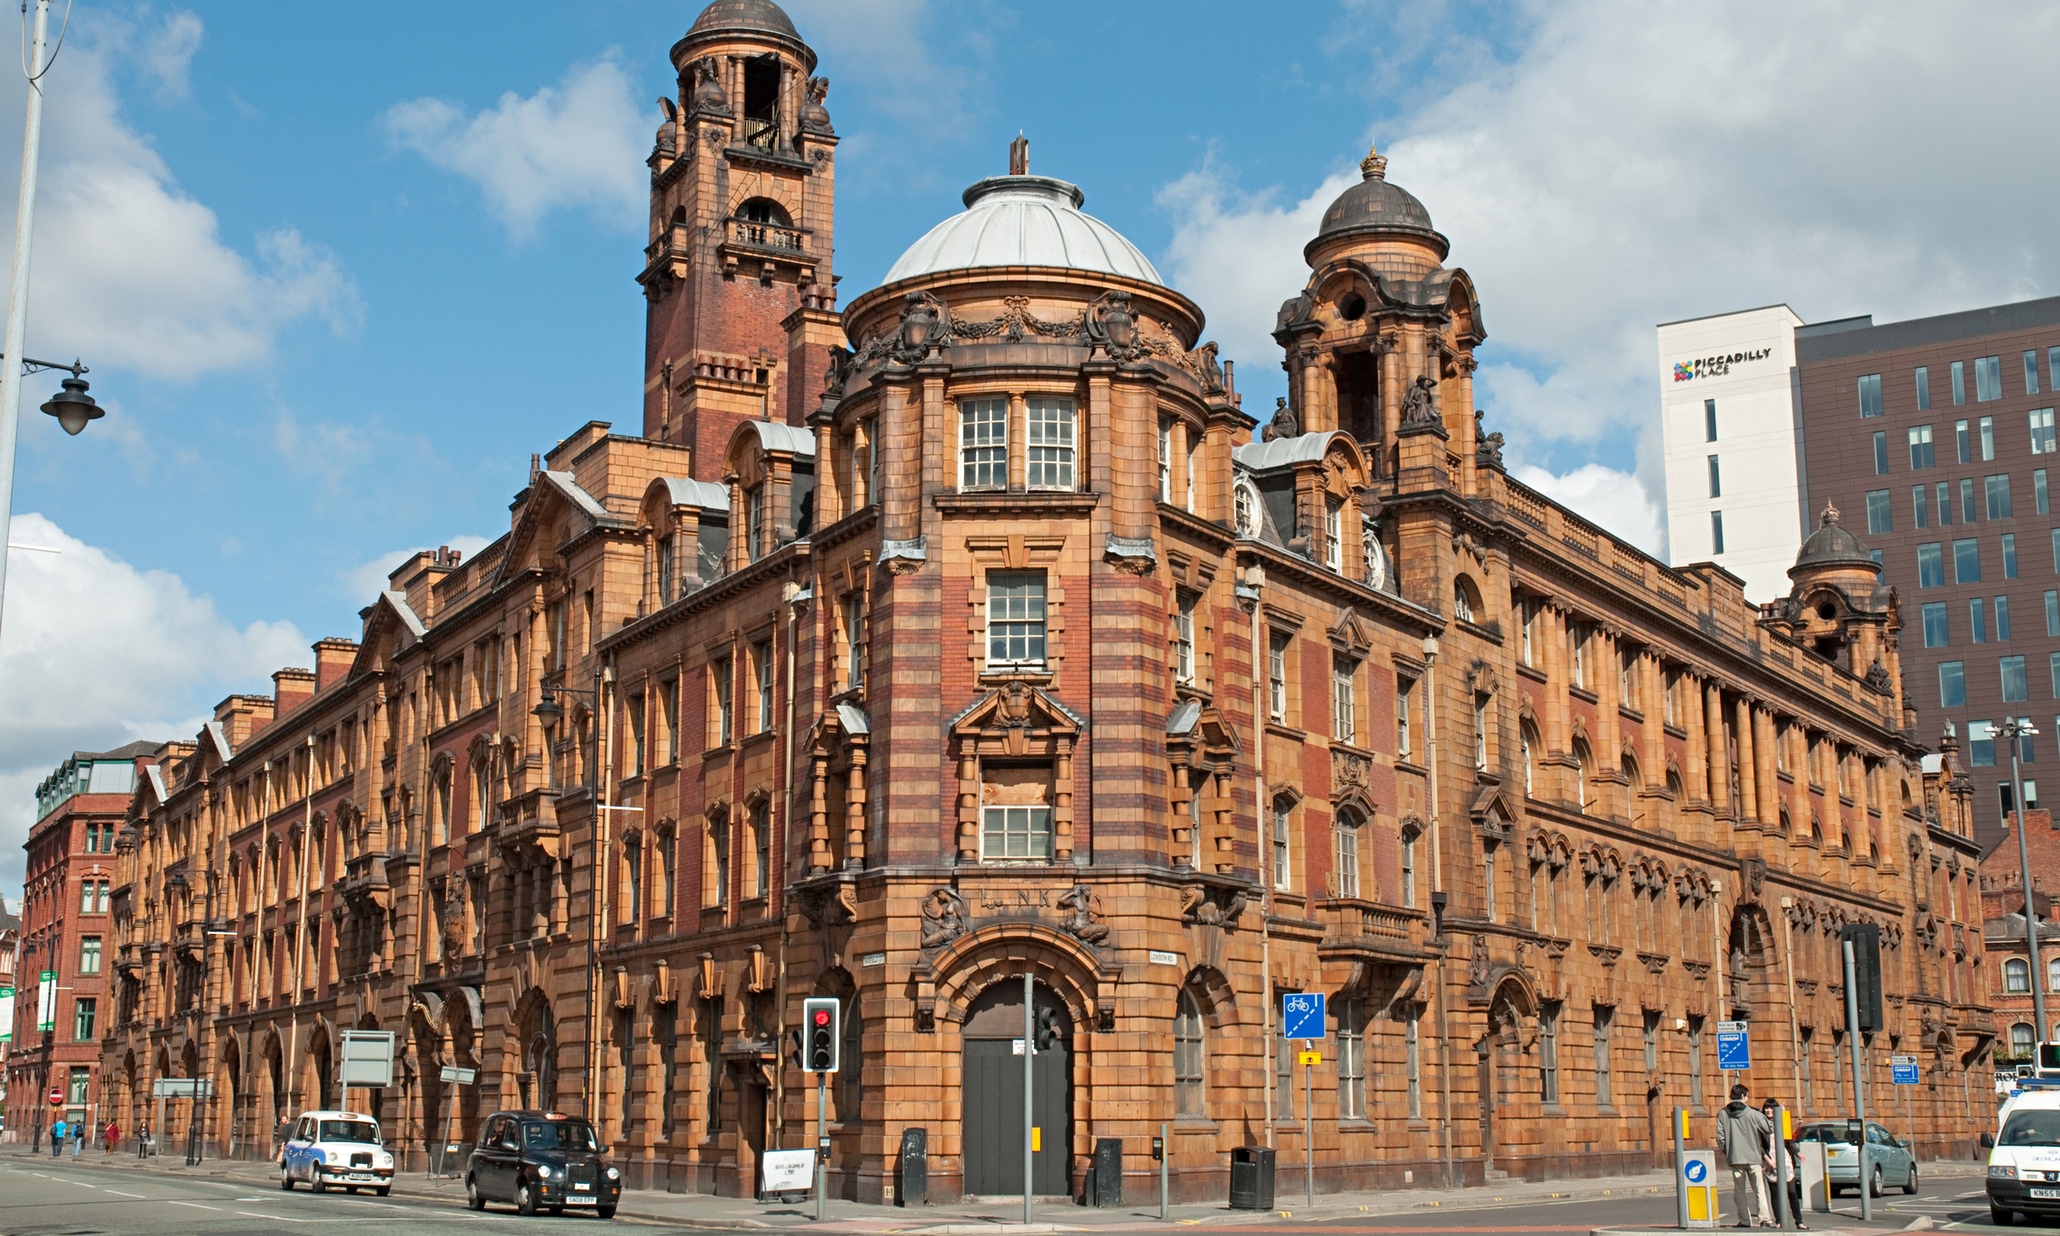 London Road fire station in Manchester.